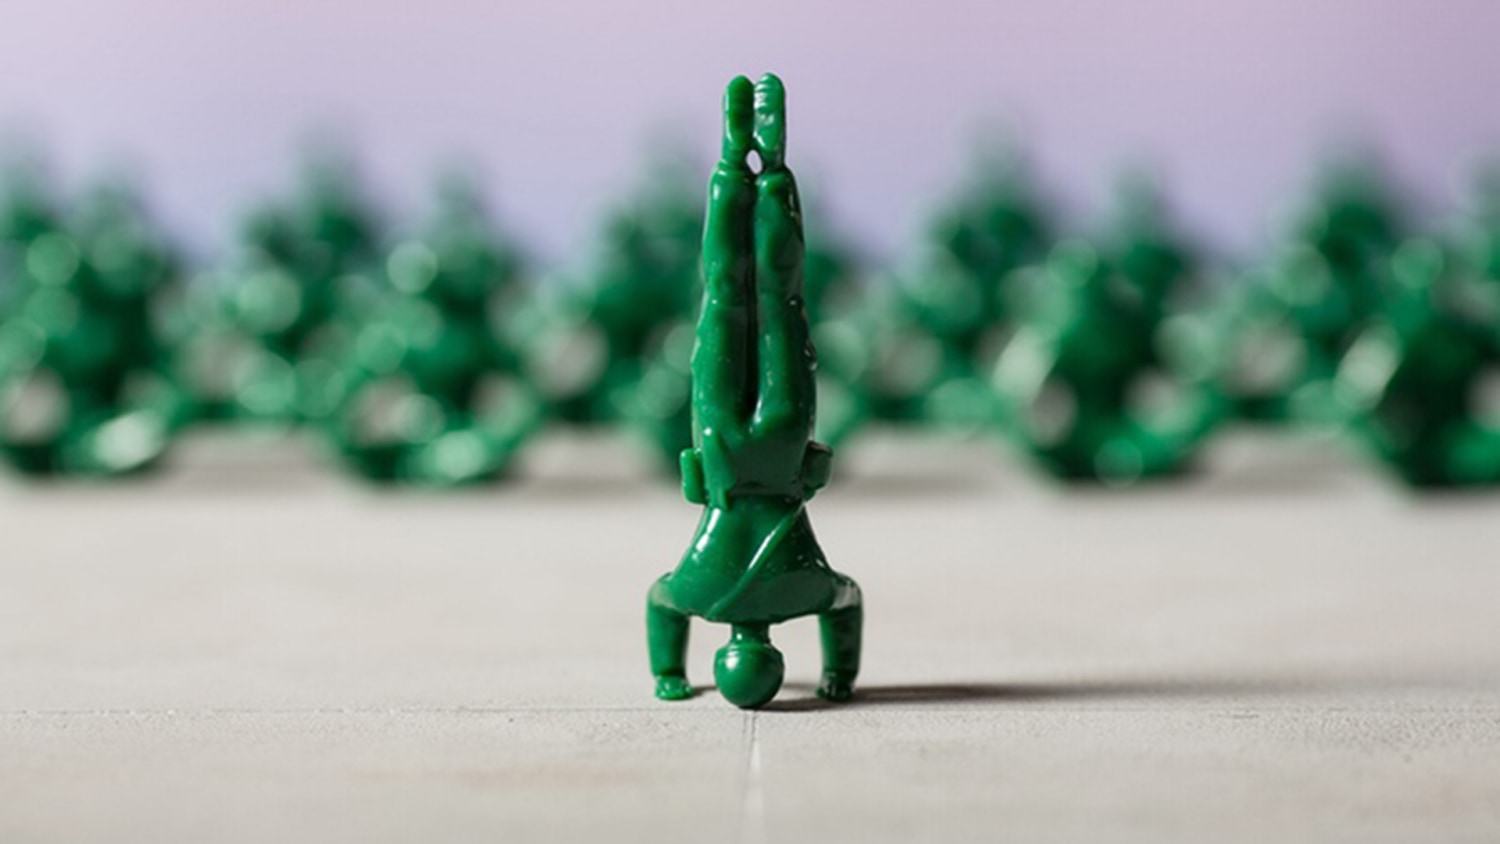 Green Army Men Toys non-violent Comes with 9 figures in yoga poses Yoga Joes 